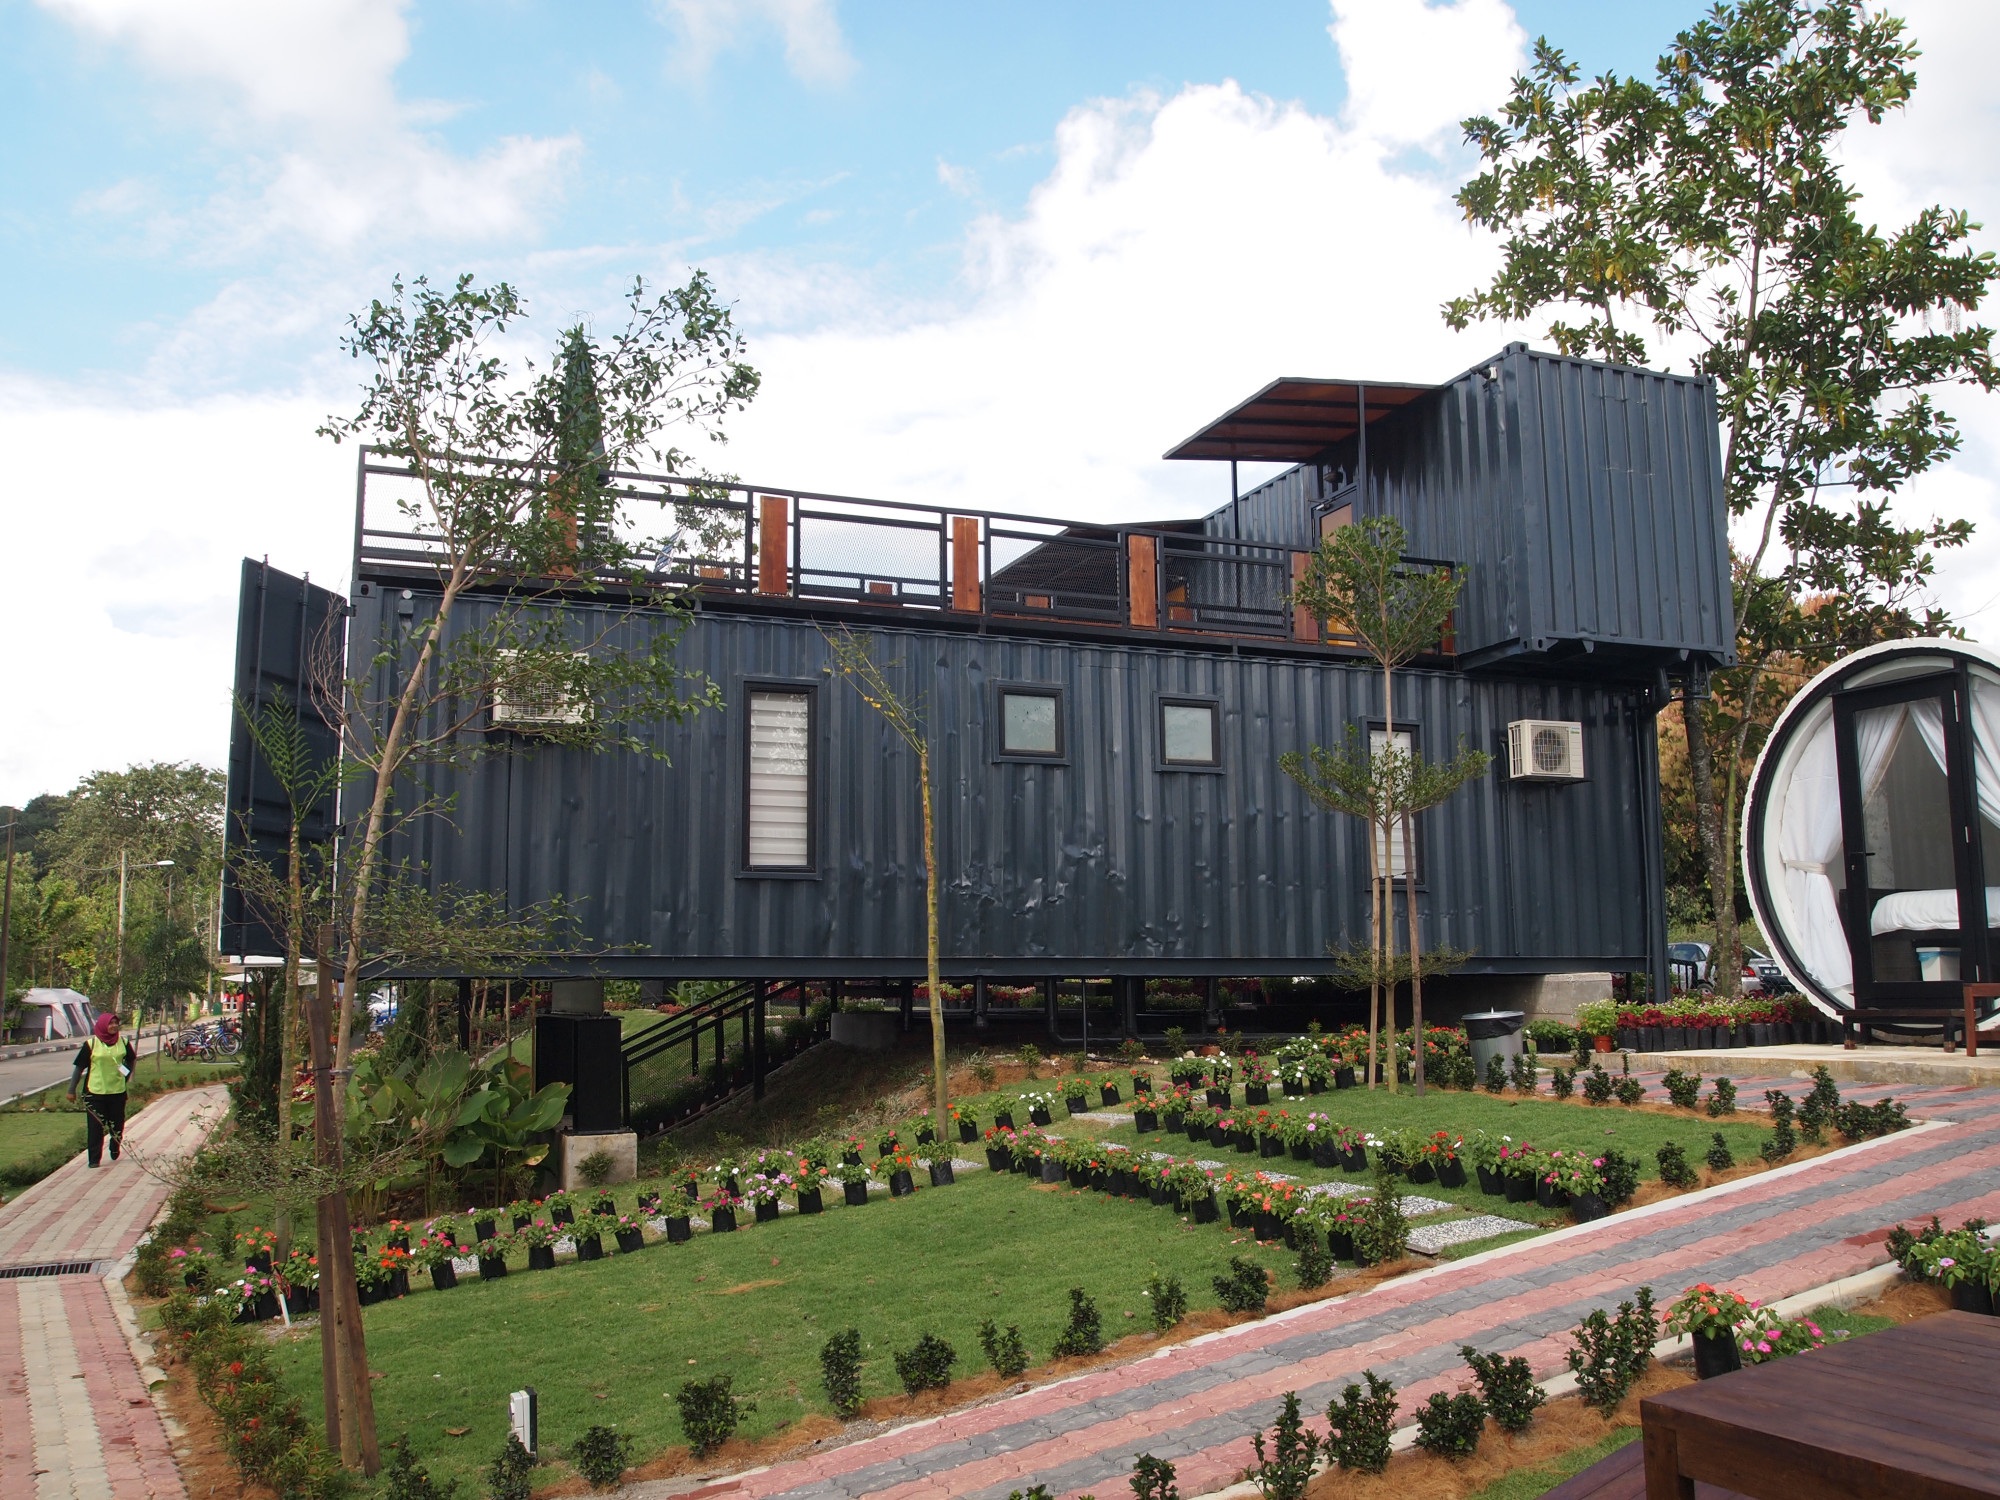 Shipping Container Homes image